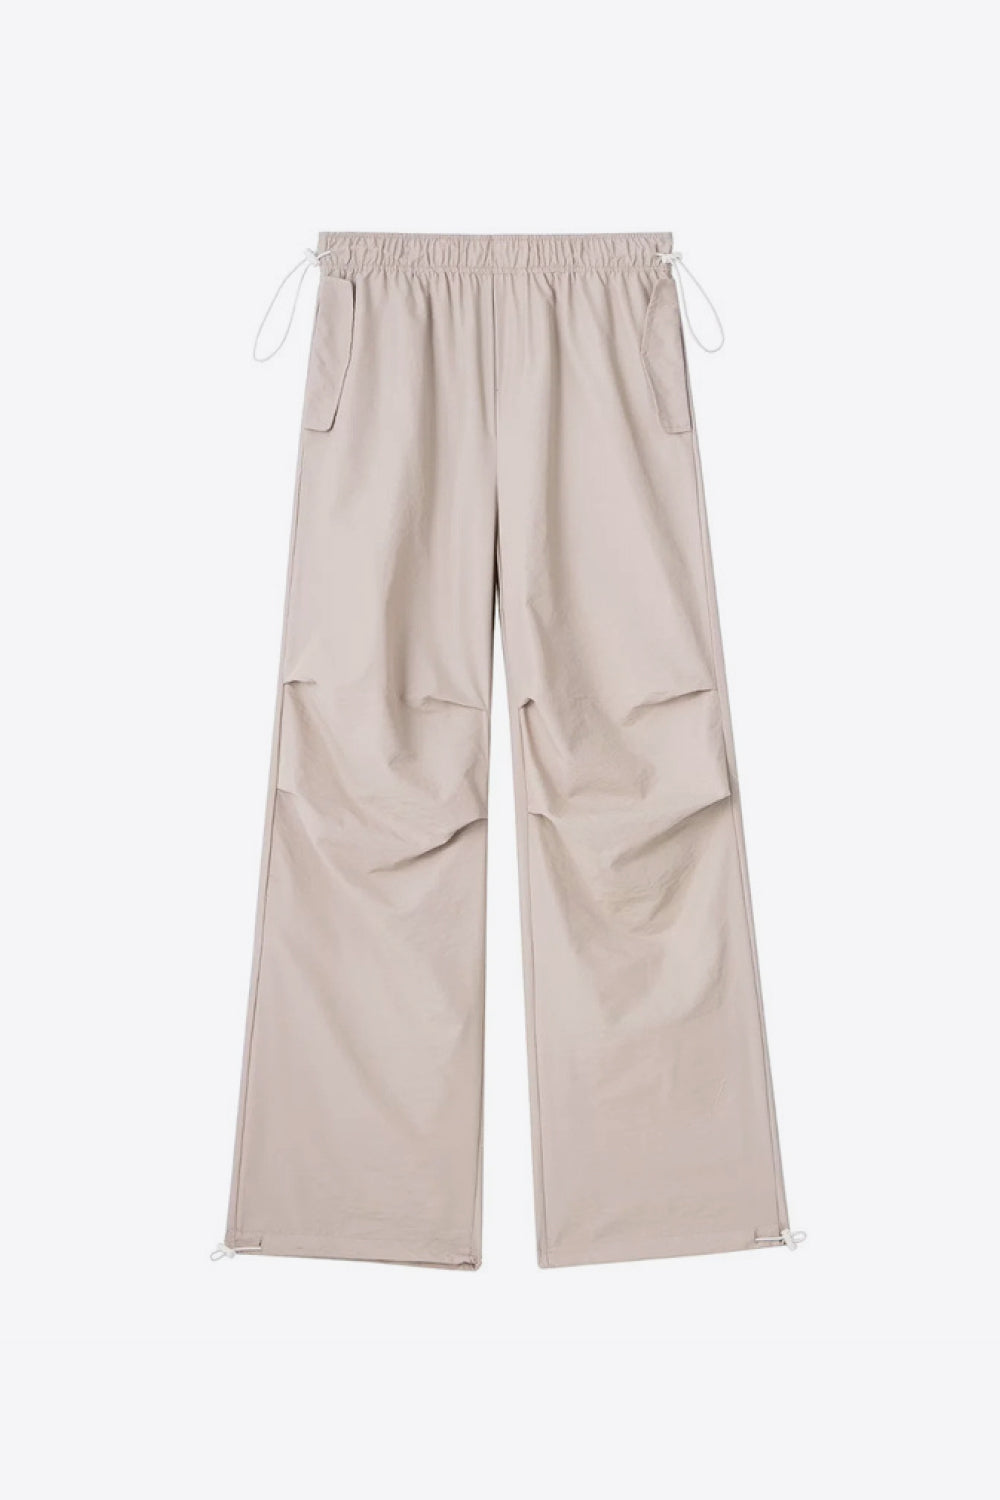 Drawstring Waist Pants with Pockets - Beige / XS - Bottoms - Pants - 14 - 2024